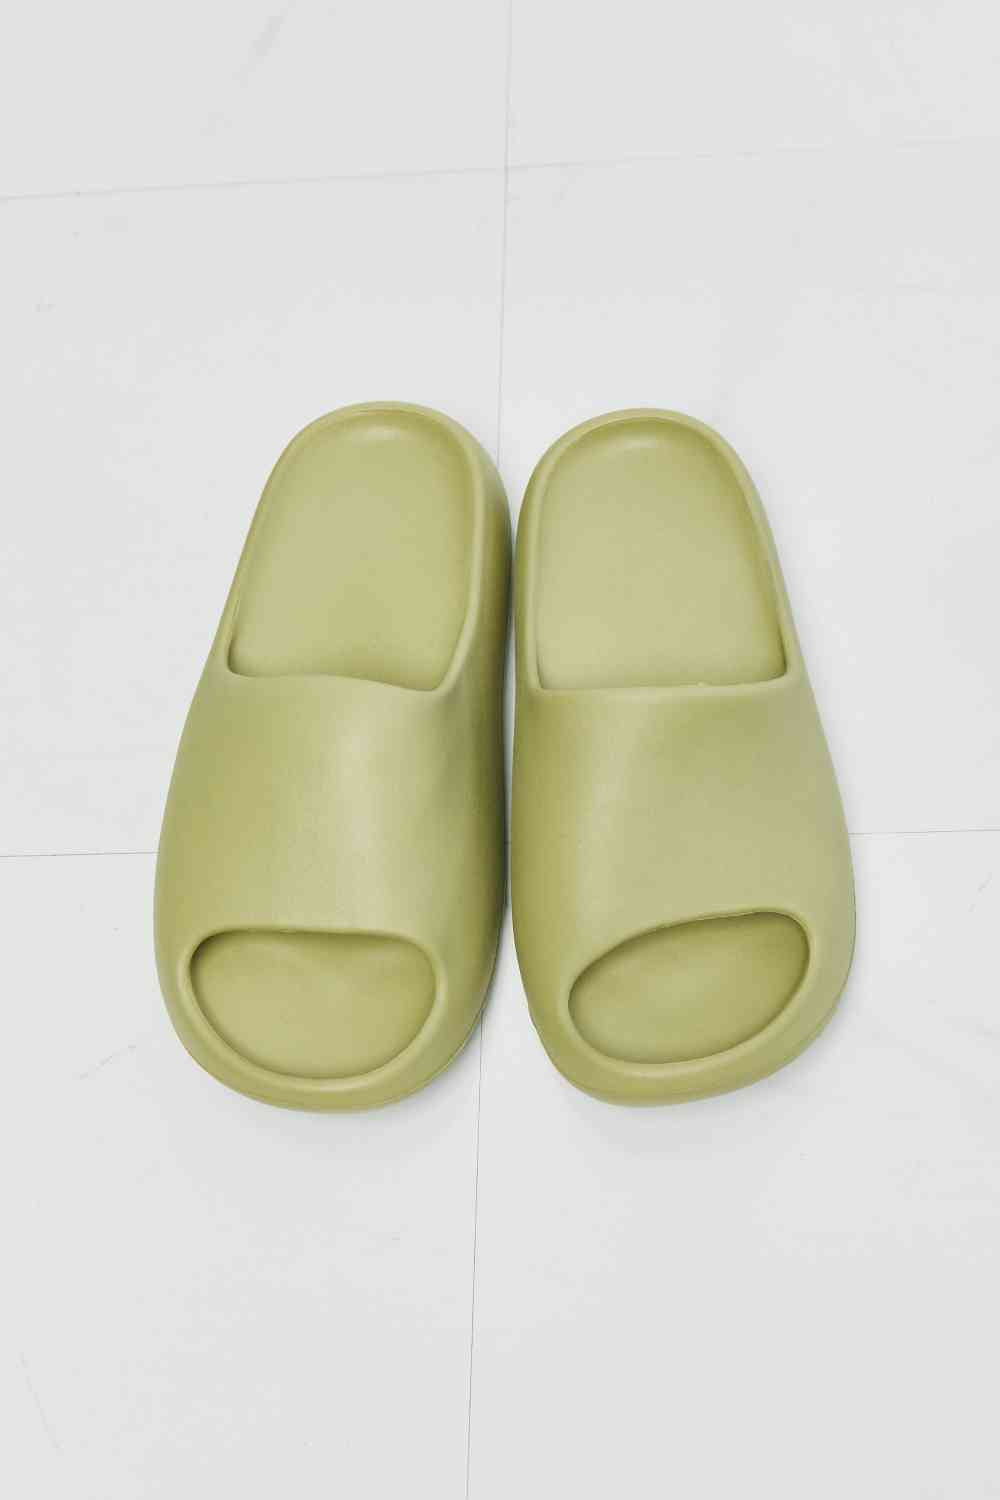 NOOK JOI In My Comfort Zone Slides in Green - Kyublis DZigns